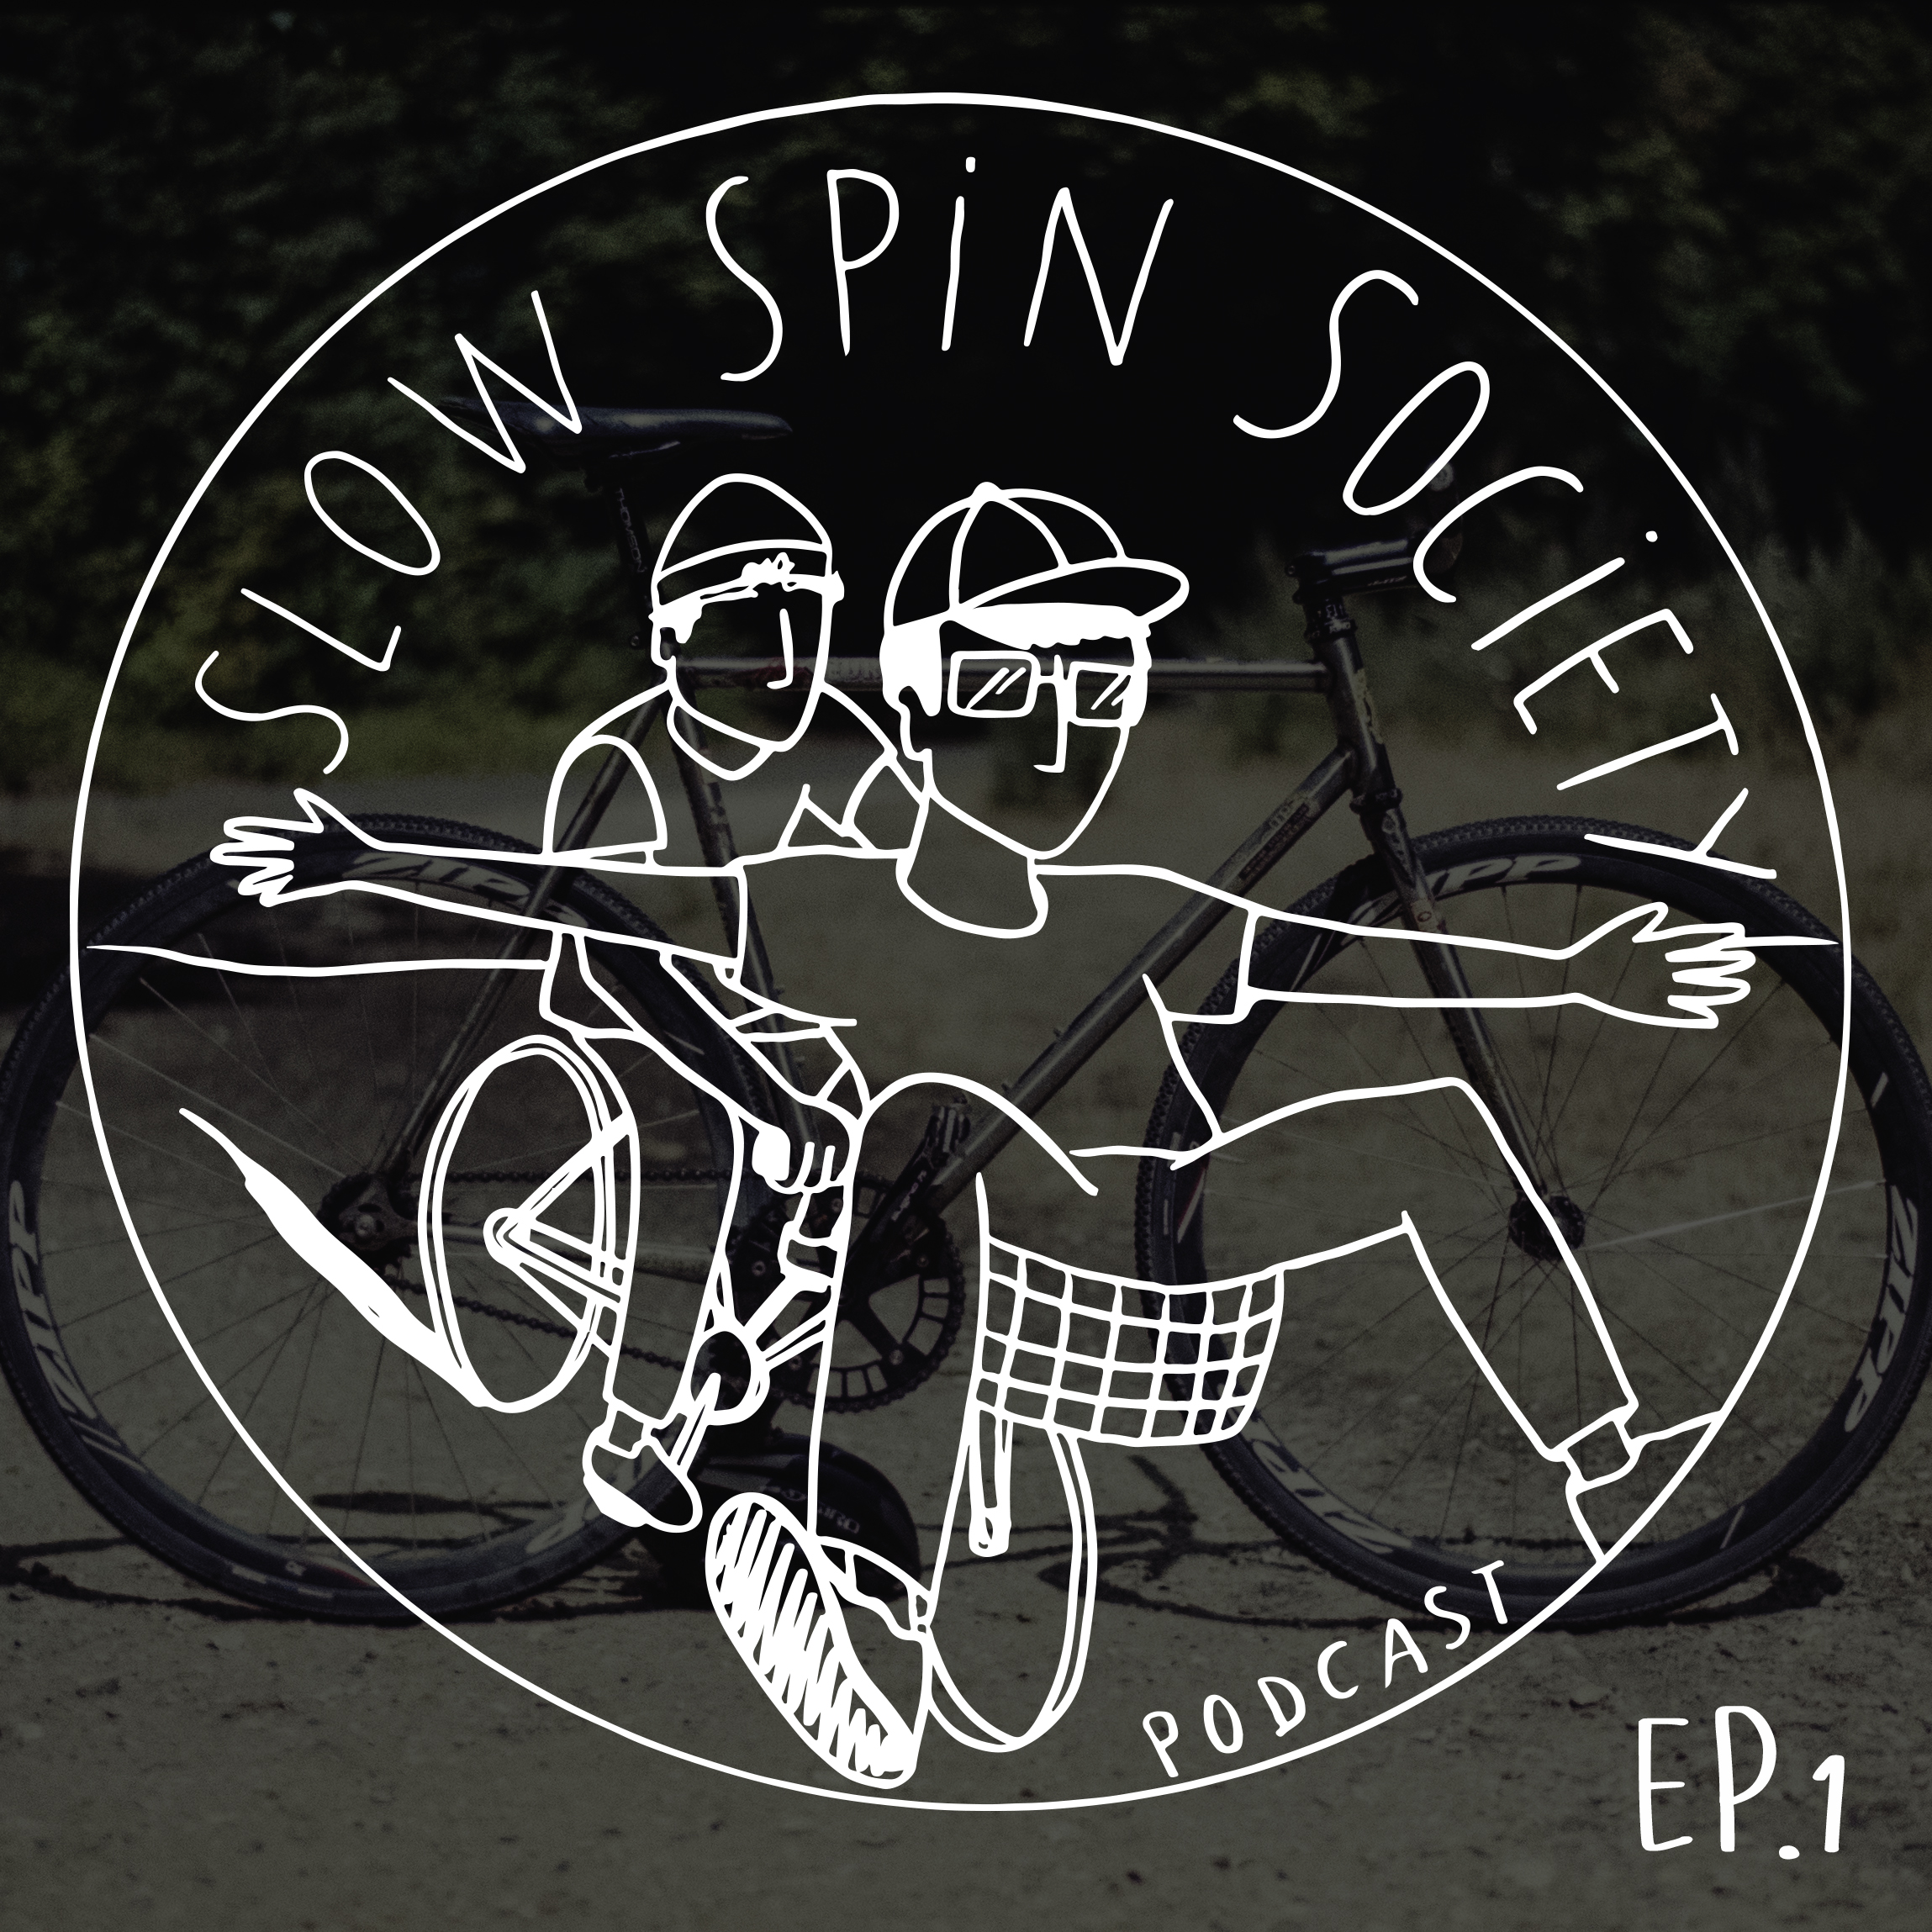 The Slow Spin Society Podcast Ep.1 : All about Tracklocross